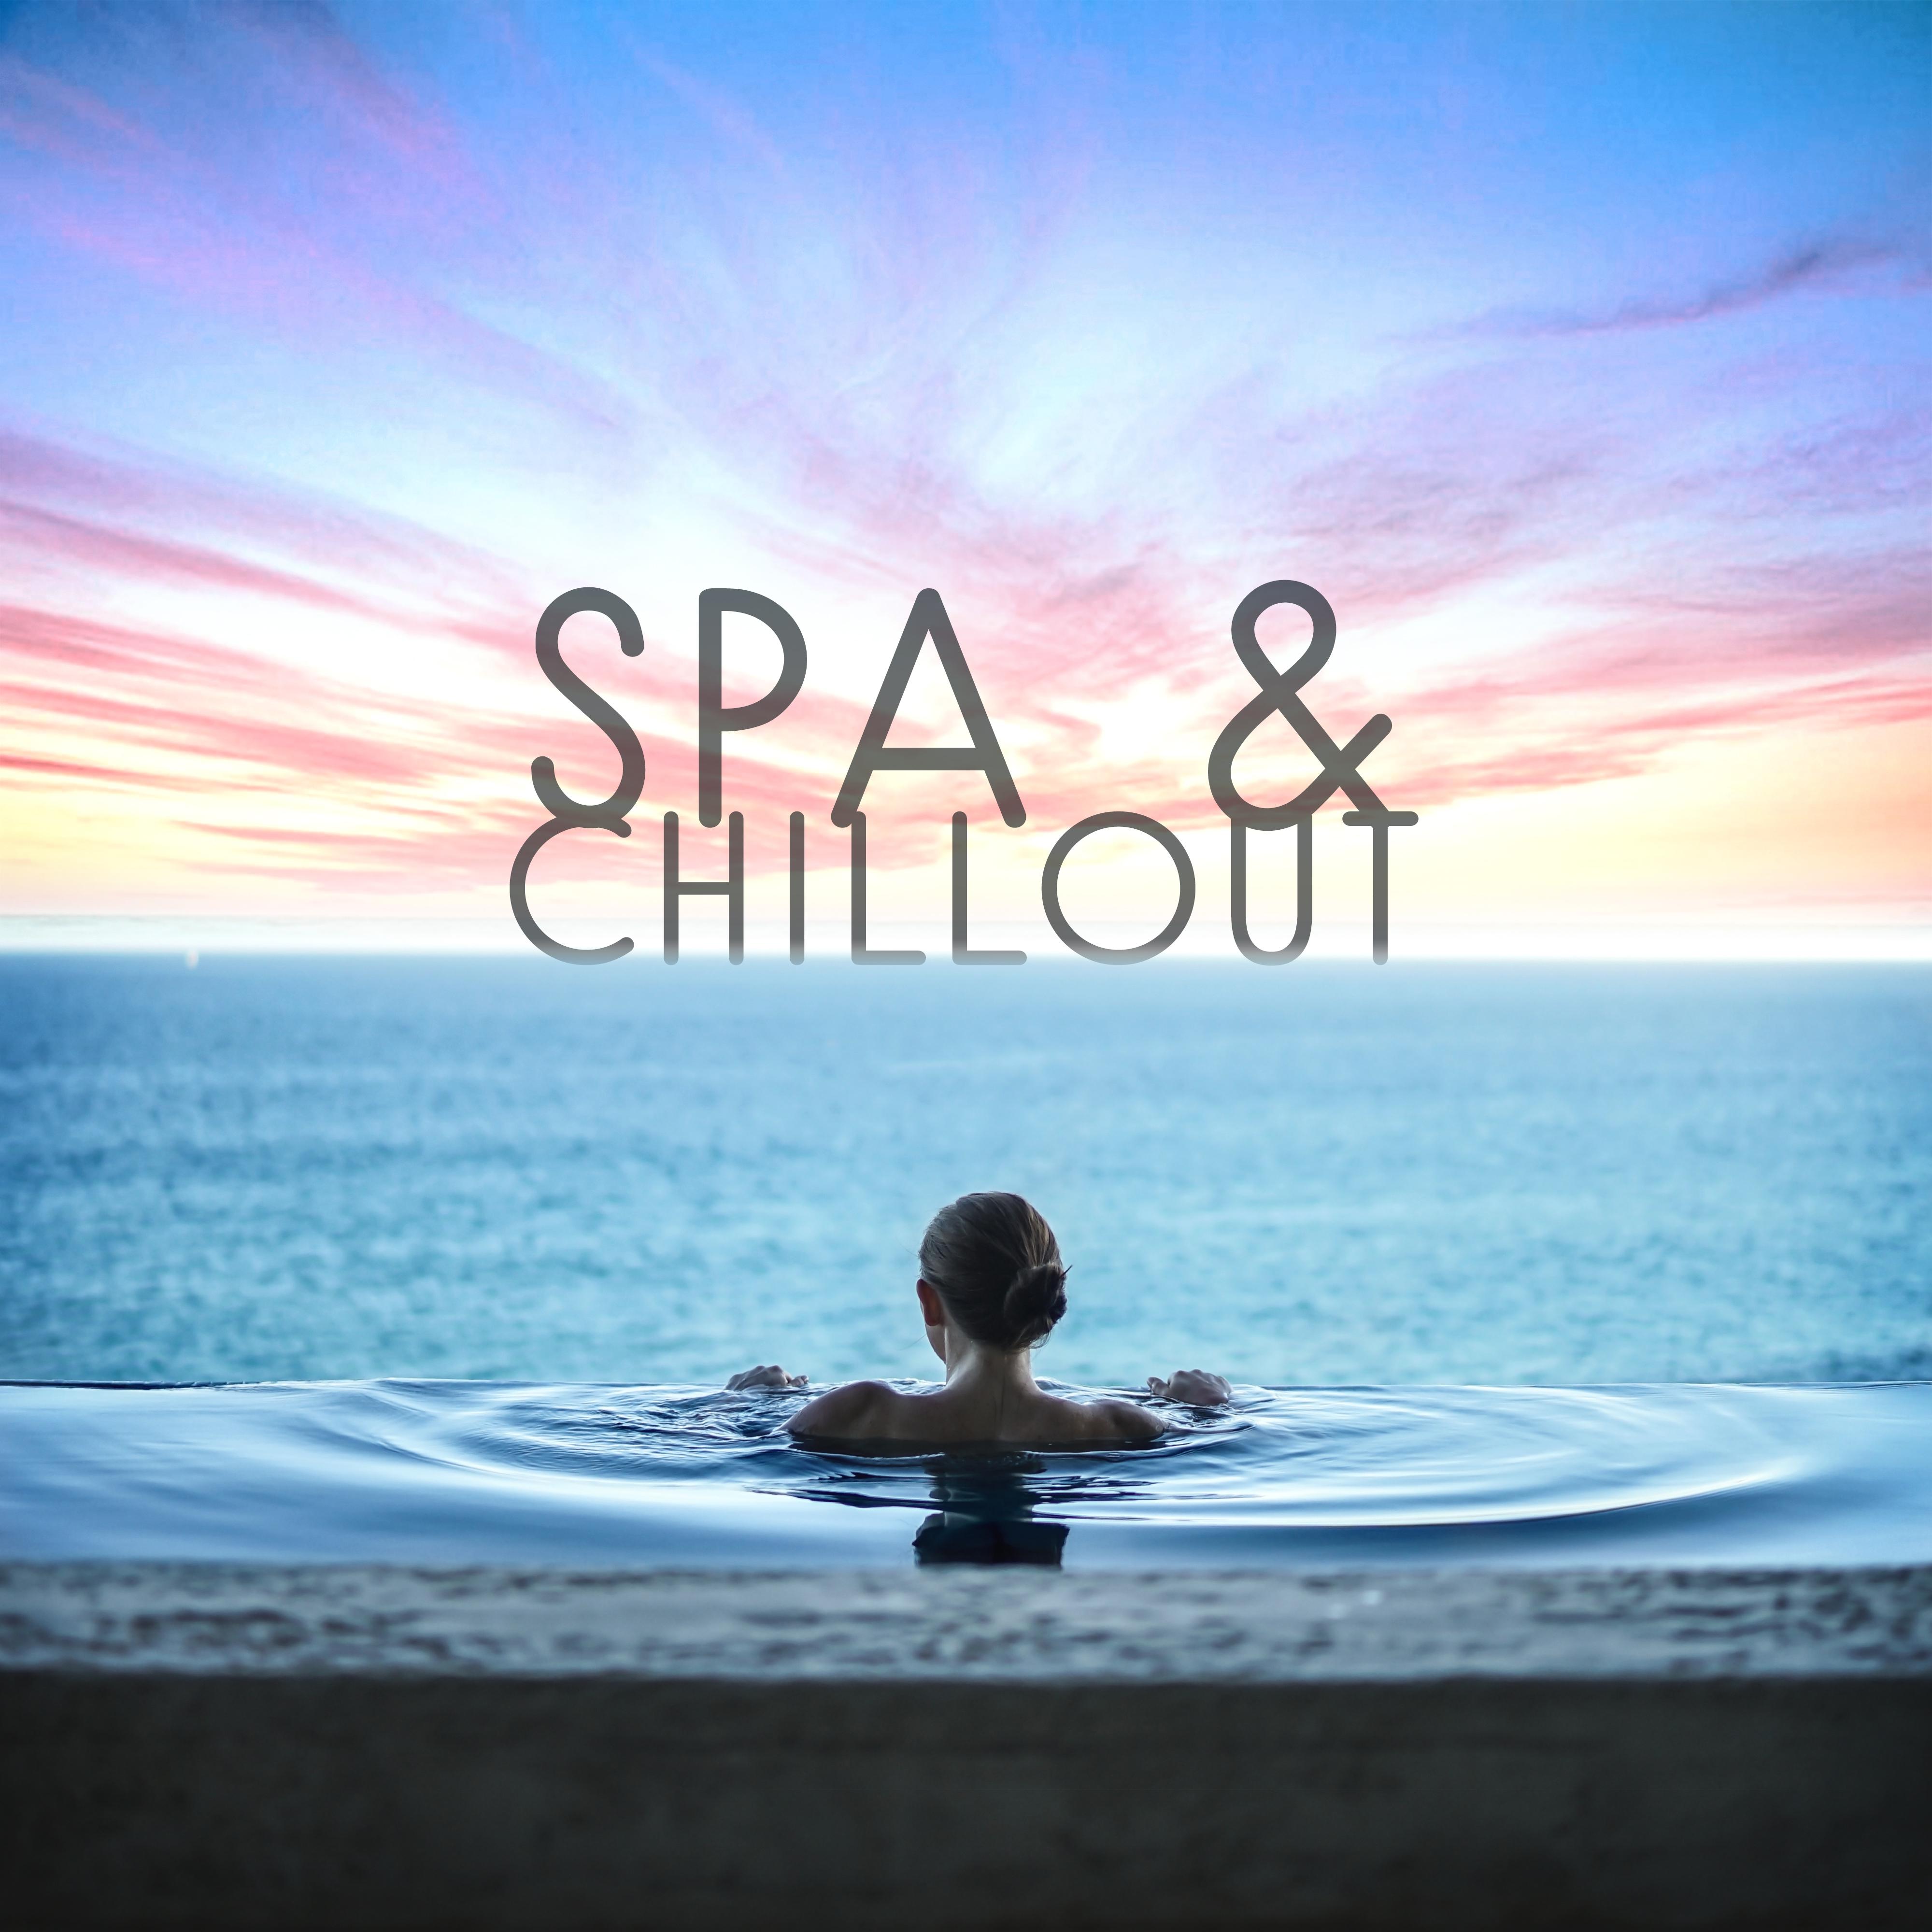 Spa & Chillout – Relaxing Spa, Chill Out Music, Soft Music for Massage